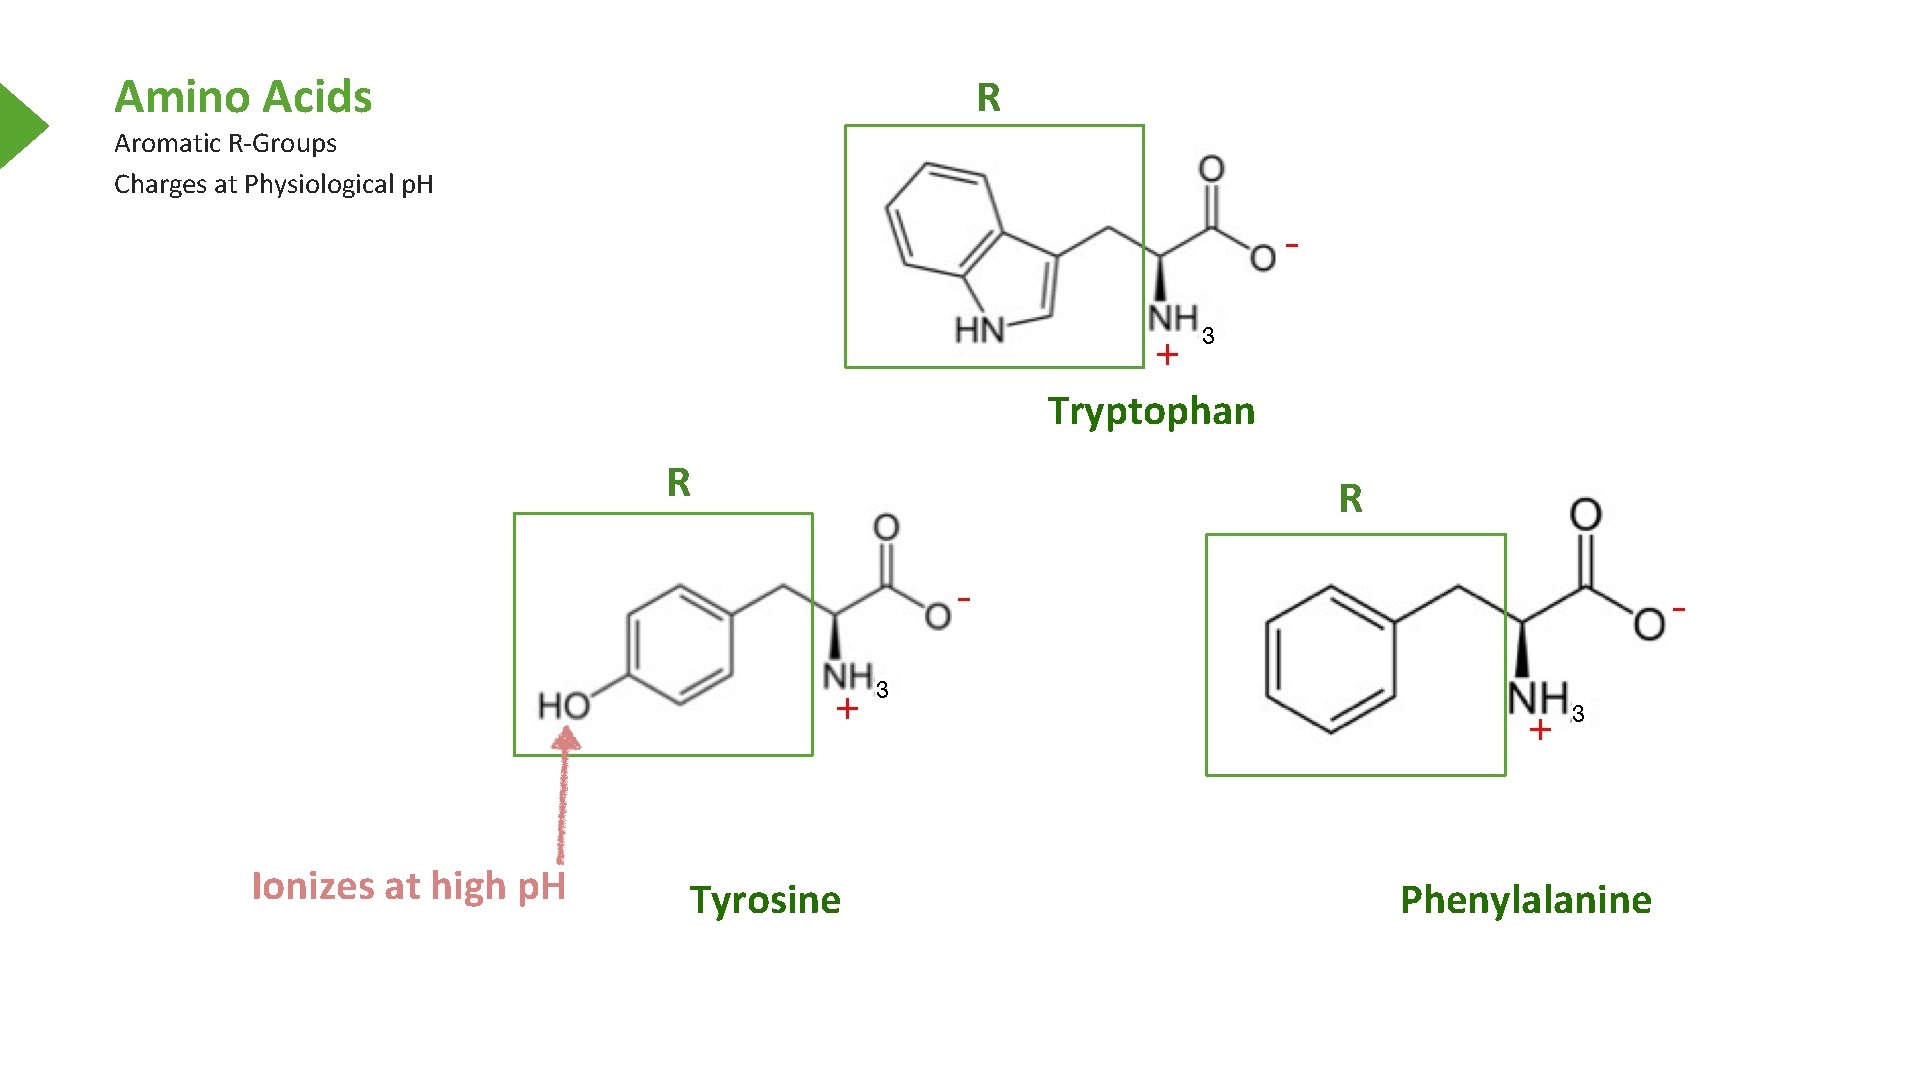 Amino Acids R Aromatic R-Groups Charges at Physiological p. H Tryptophan R Ionizes at